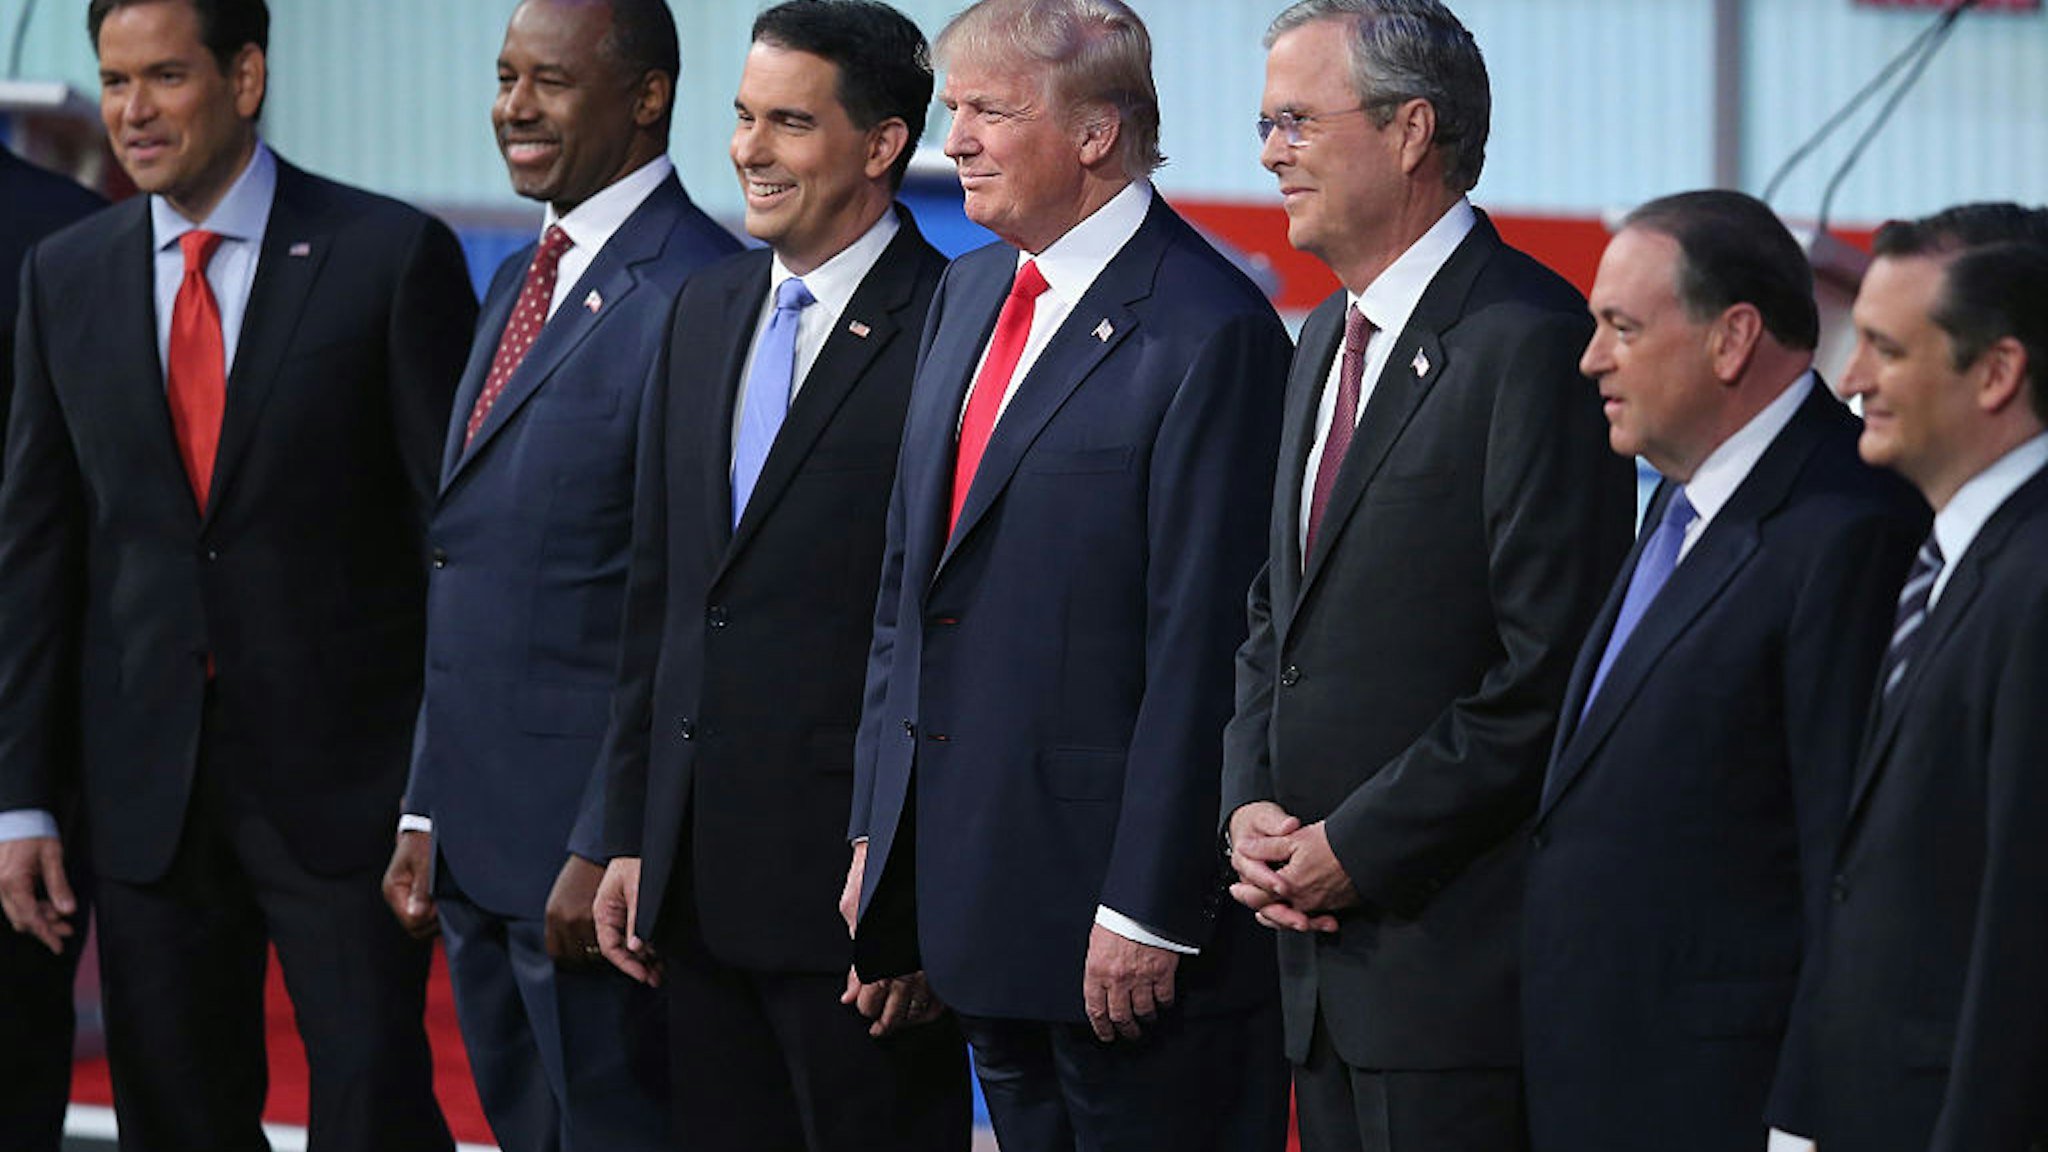 CLEVELAND, OH - AUGUST 06: Republican presidential candidates (L-R) Sen. Marco Rubio (R-FL), Ben Carson, Wisconsin Gov. Scott Walker, Donald Trump, Jeb Bush, Mike Huckabee and Sen. Ted Cruz (R-TX) take the stage for the first prime-time presidential debate hosted by FOX News and Facebook at the Quicken Loans Arena.